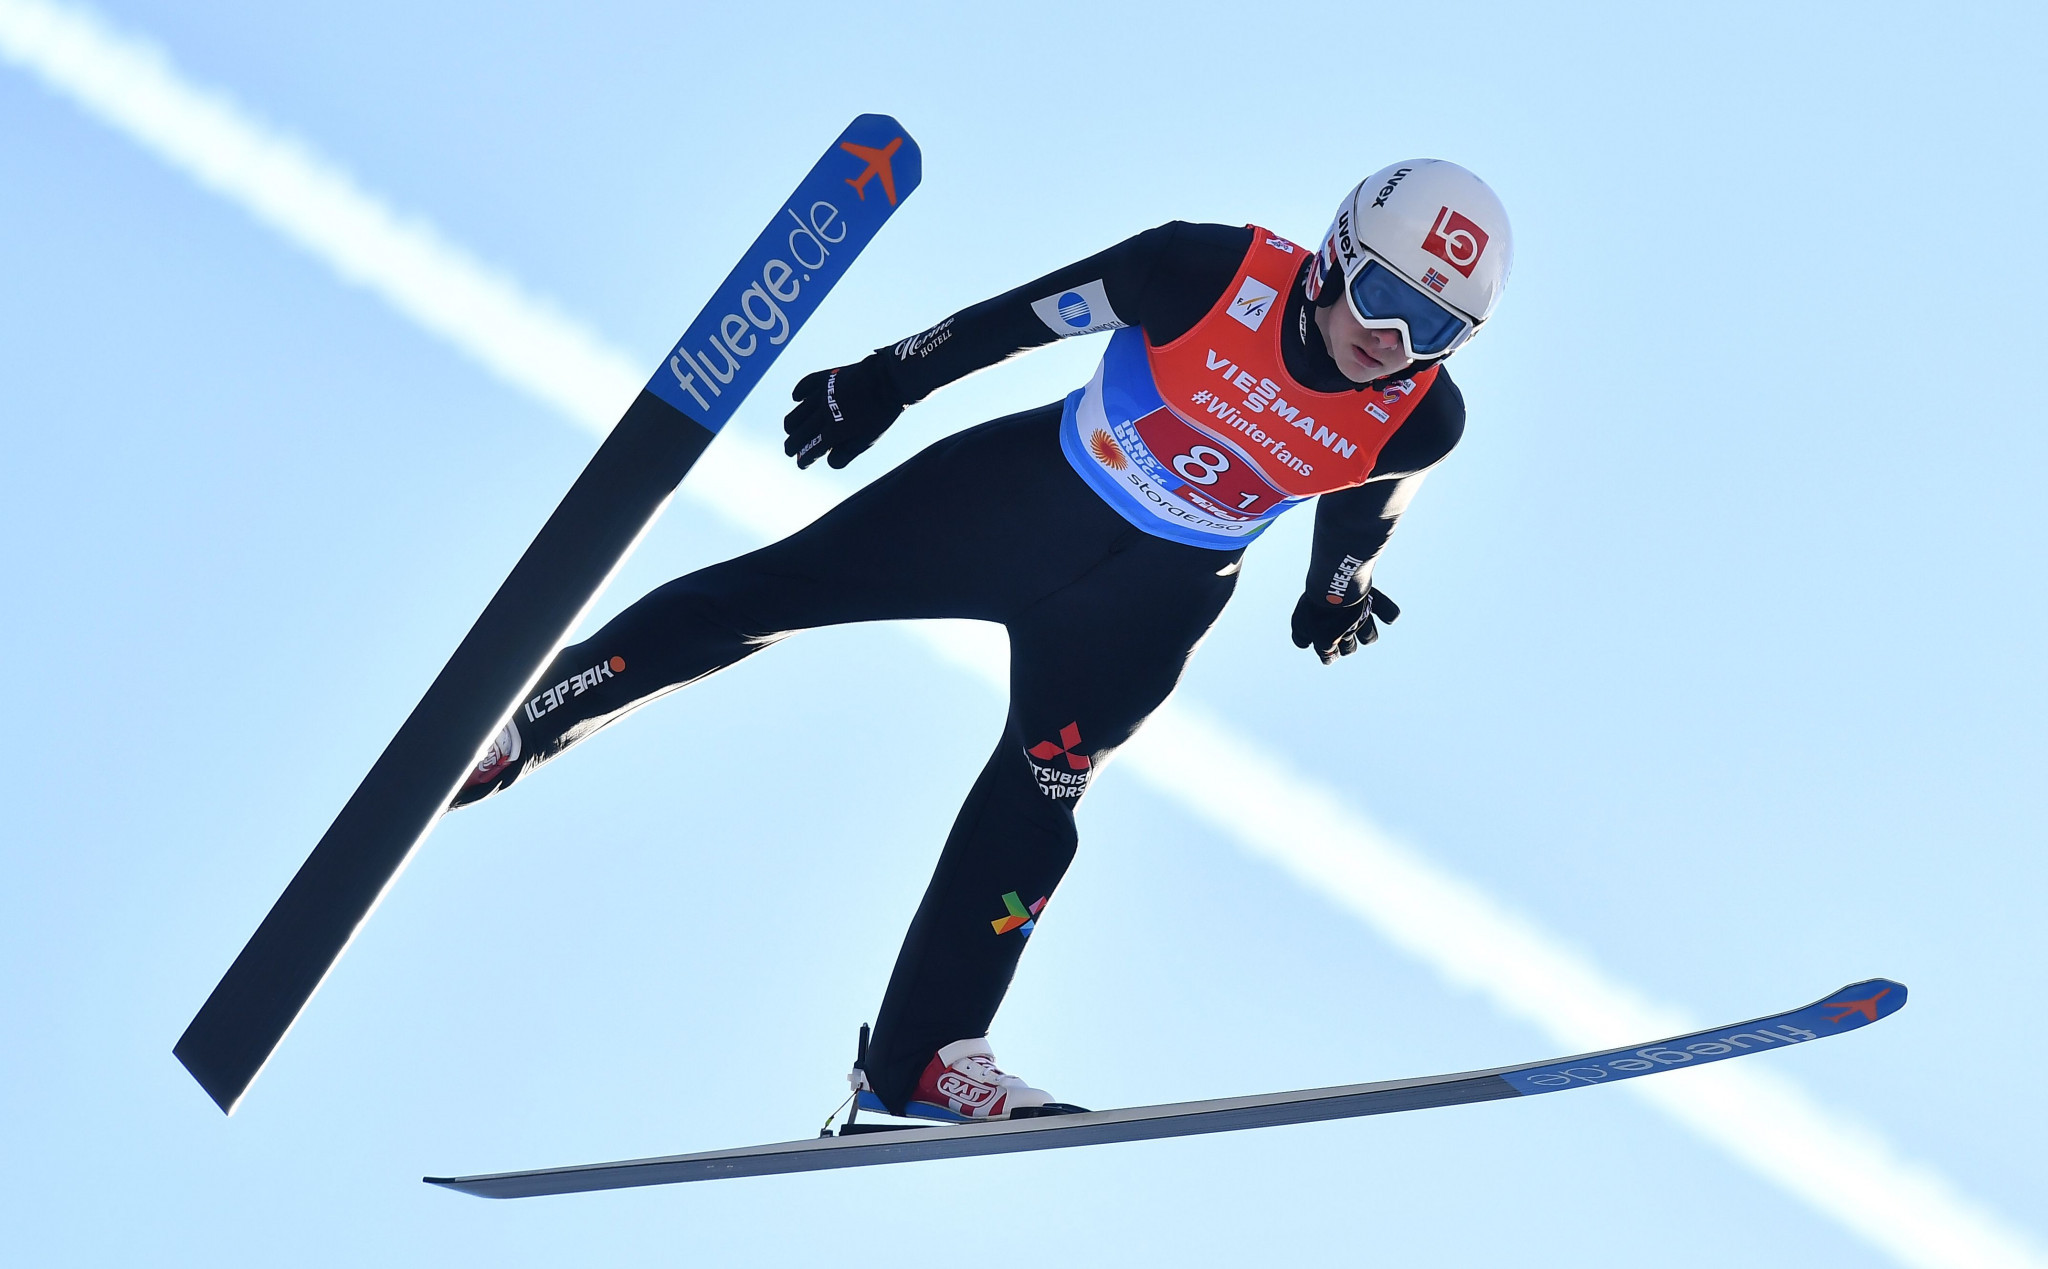 Halvor Egner Granerud leads the overall FIS Ski Jumping World Cup standings after a run of three successive wins ©Getty Images